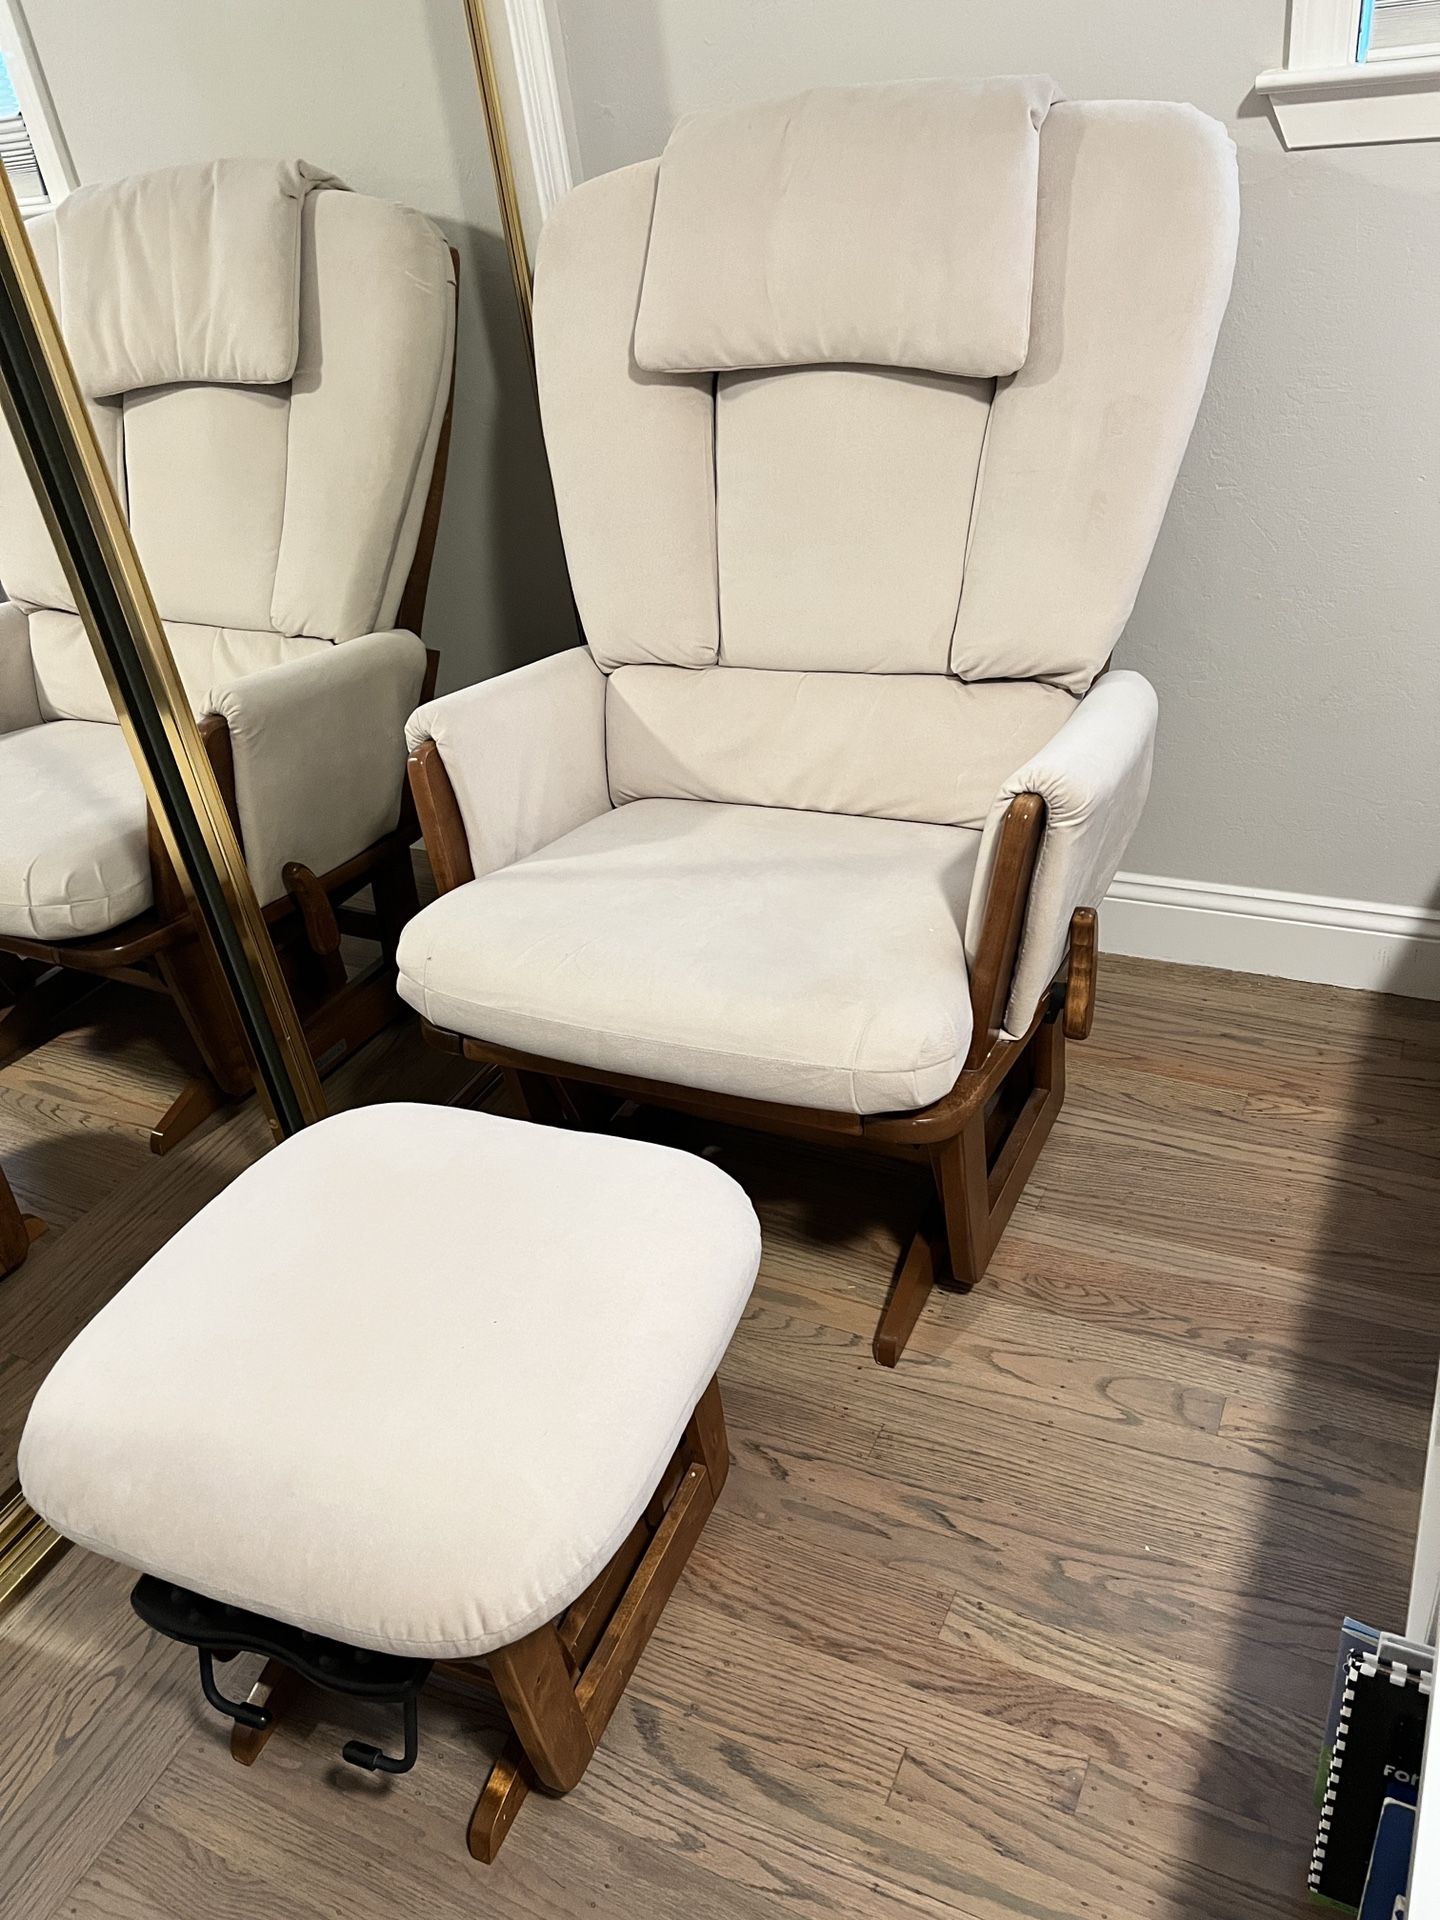 Dutalier Extra Wide Nursing Chair And Footrest - Perfect For Twins